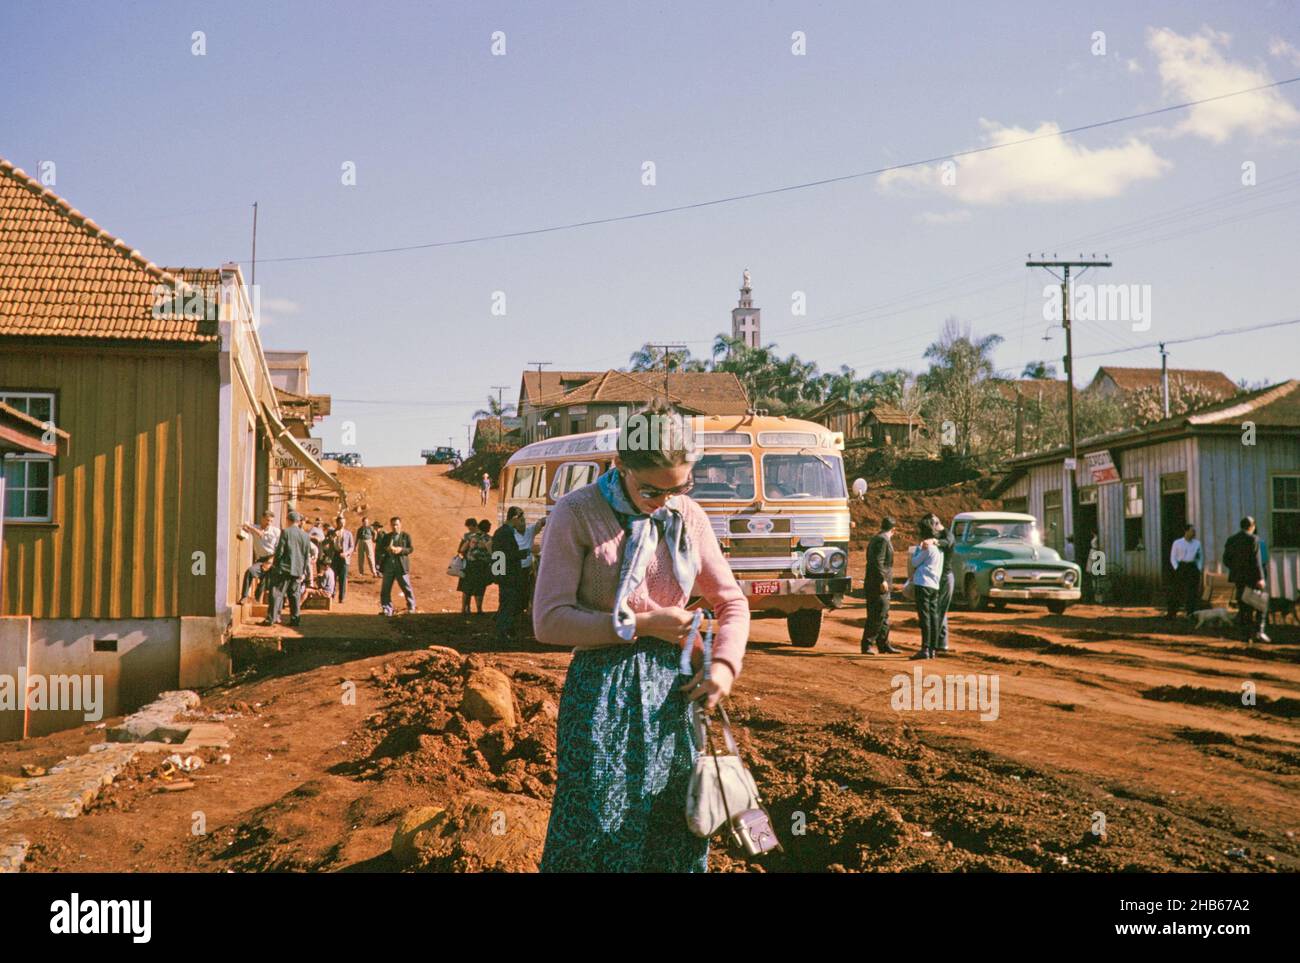 Bus stop in rural settlement on route between Curitiba and Foz do Iguaçu, Laranjeiras do Sol, Paraná state, Brazil in 1962, female tourist passenger in the foreground Stock Photo